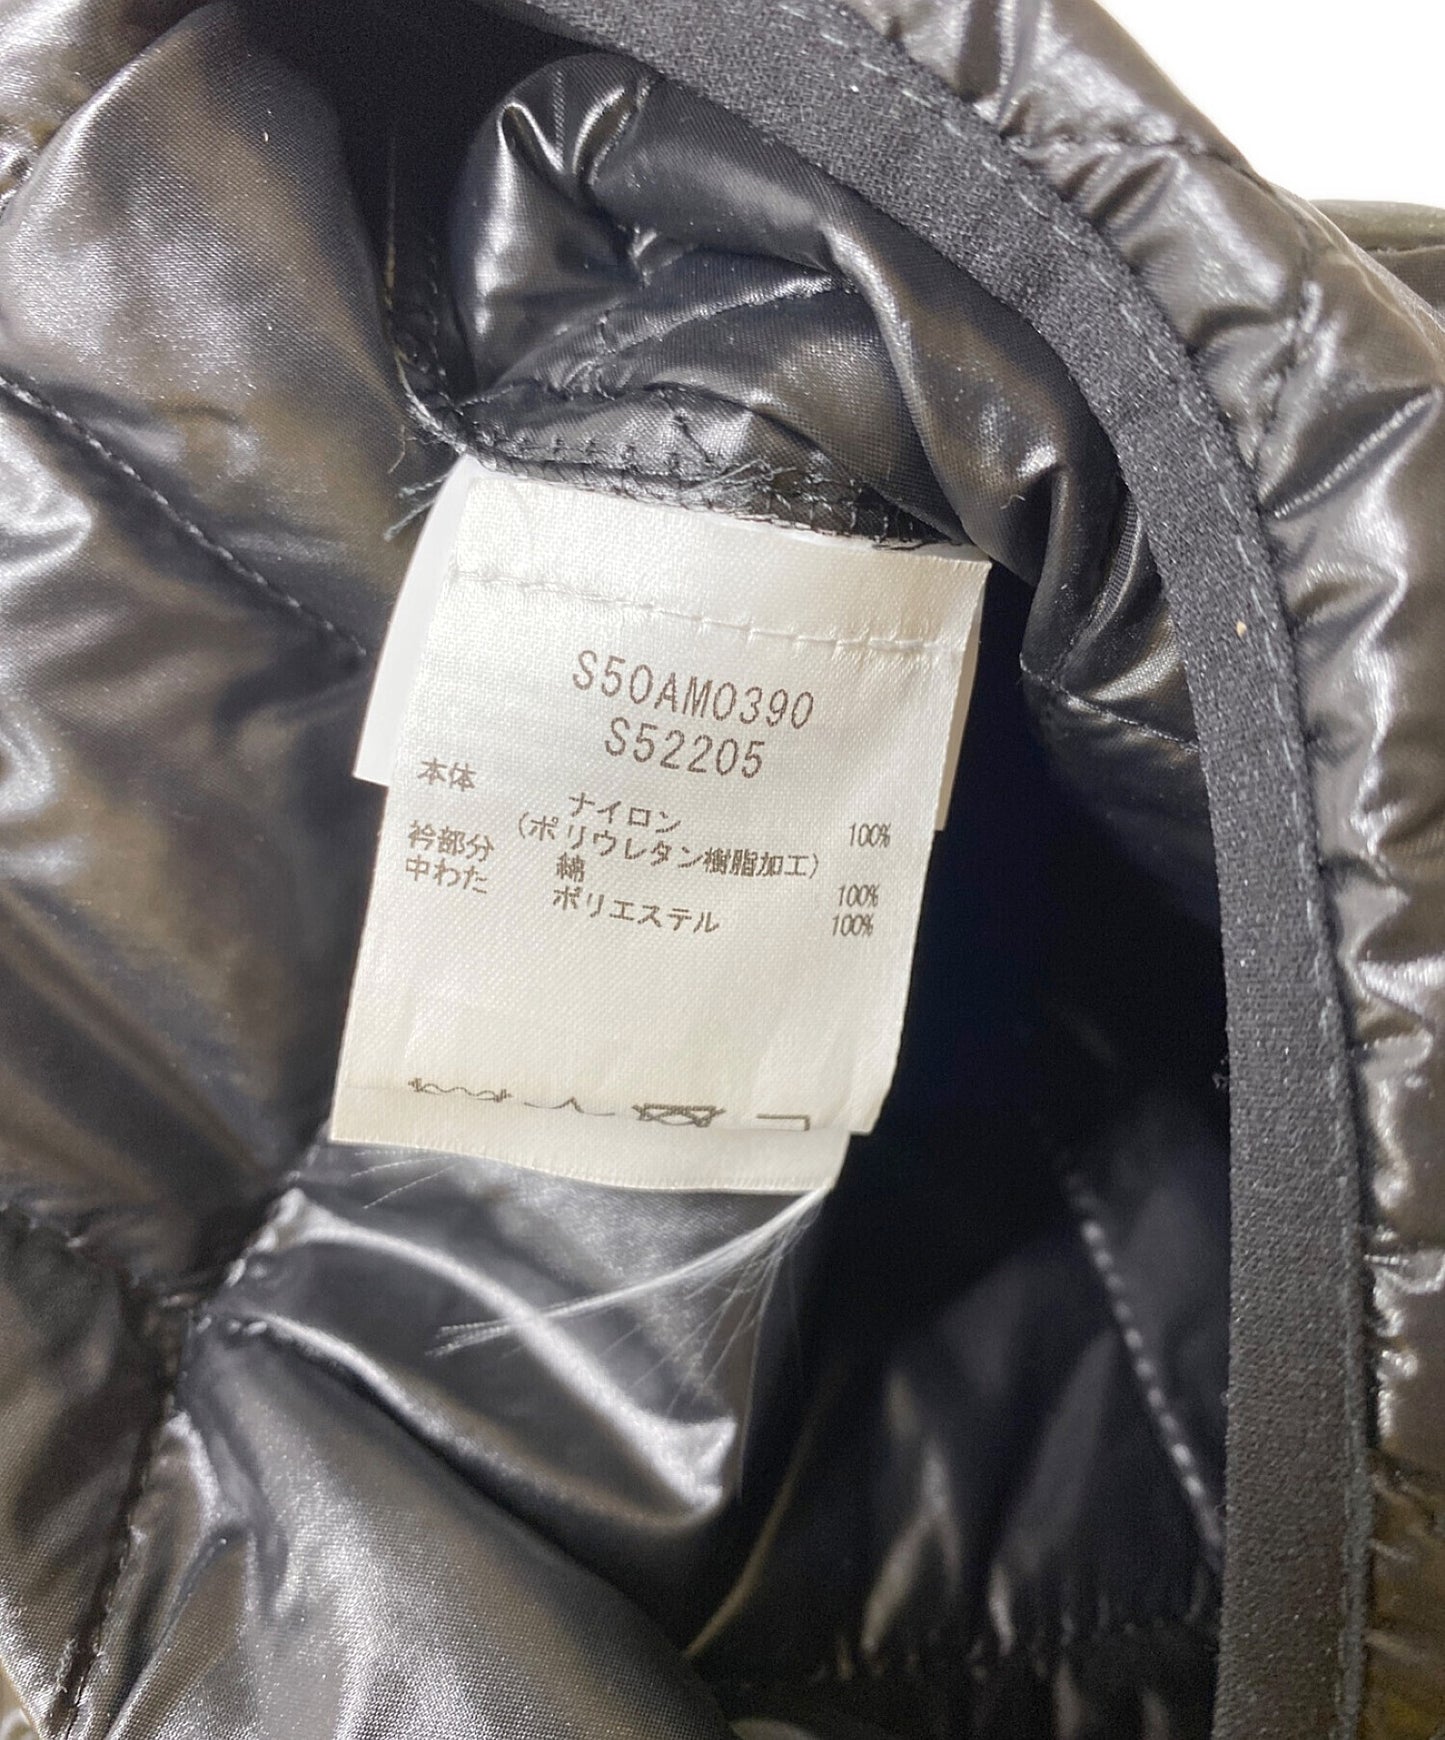 [Pre-owned] Martin Margiela 10 Quilted Nylon Blouson S50AM0390